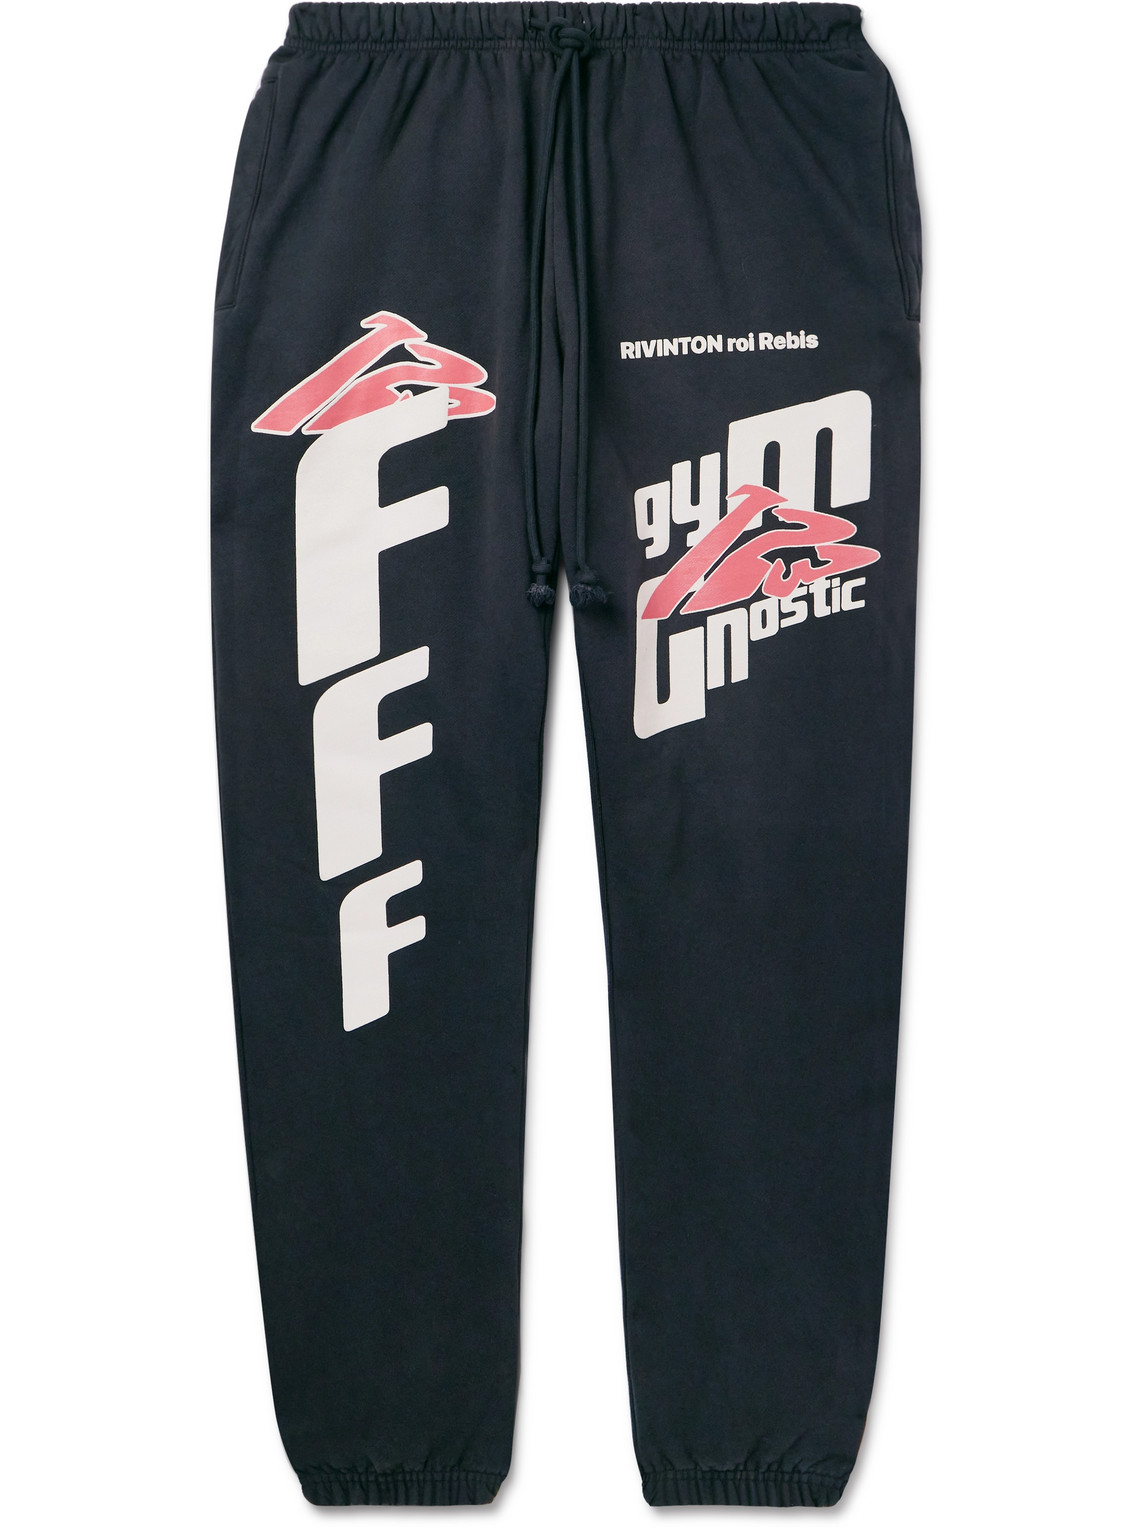 Rrr123 Fasting For Faster Tapered Printed Cotton-jersey Sweatpants In Black